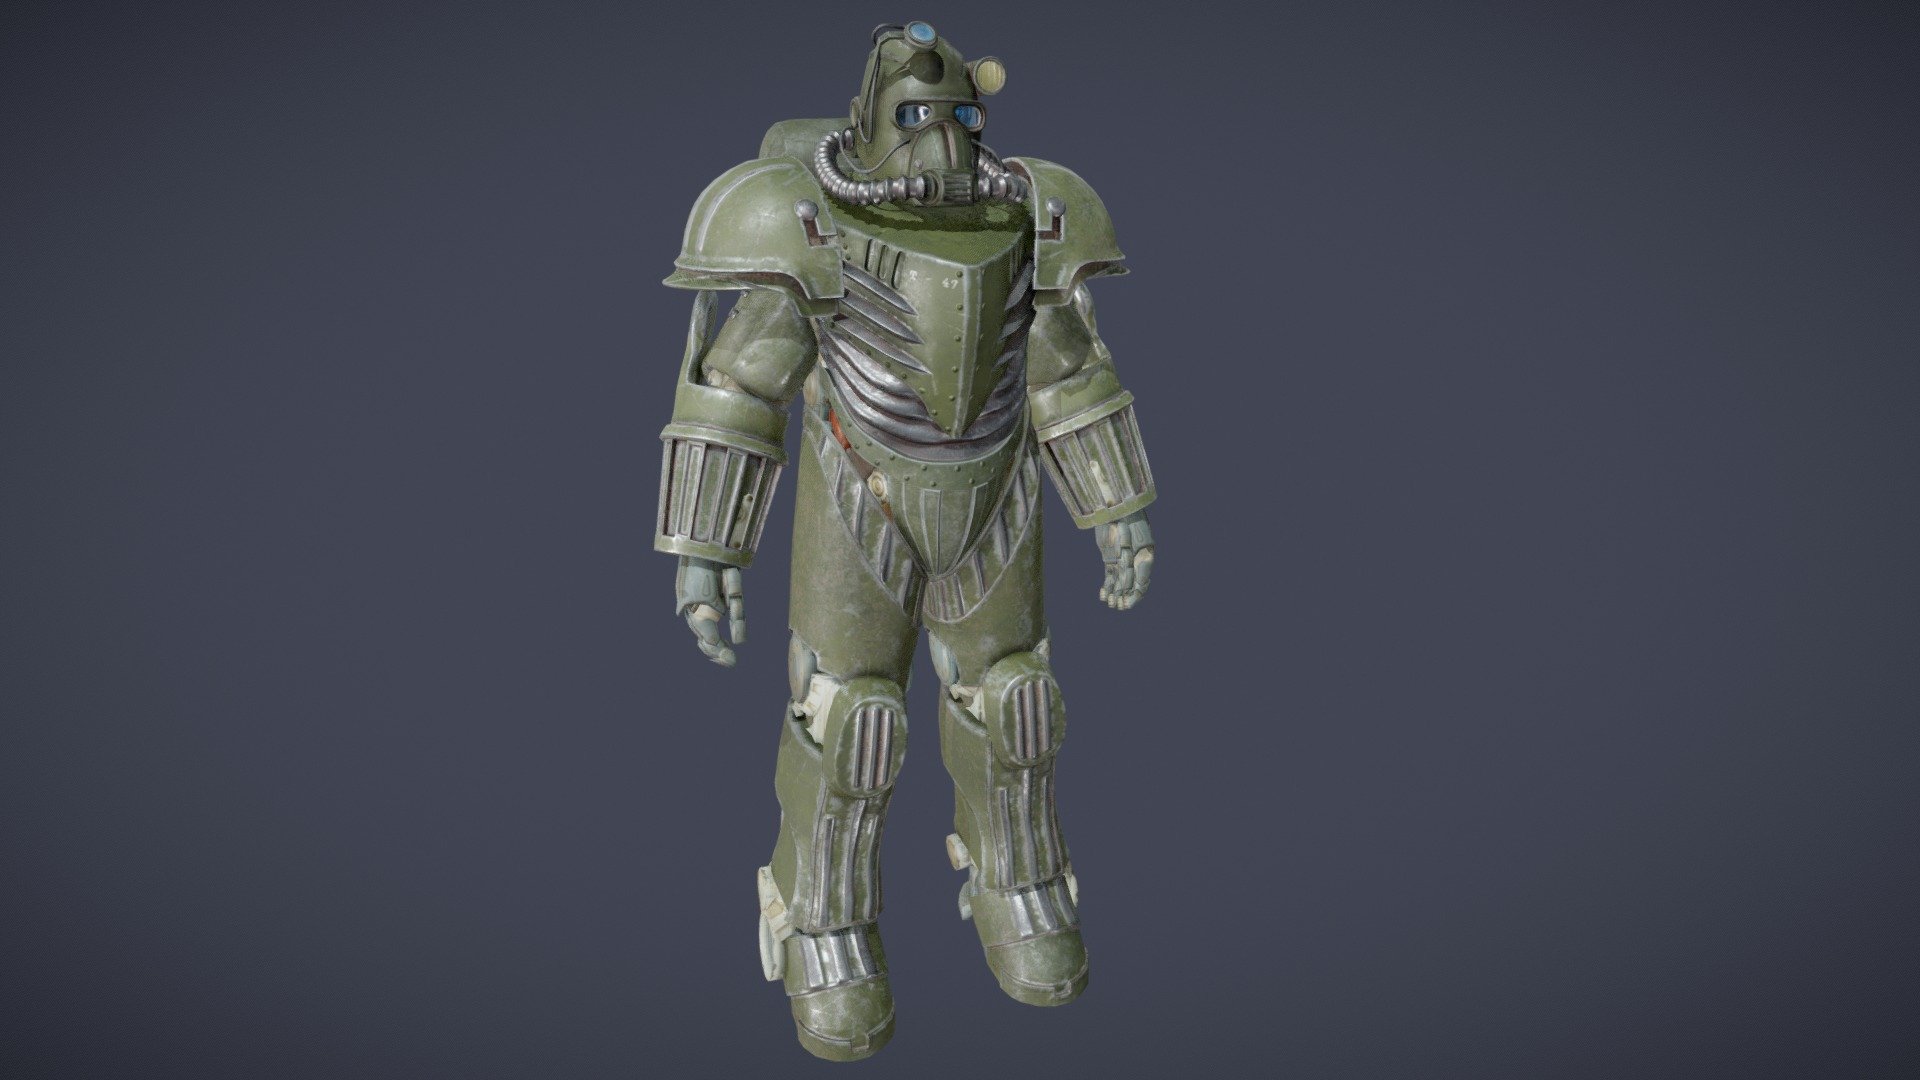 Originally created as part of a Fallout: 4 mod project, this is my first foray into armor modeling. This armor is based off of the concept by            Caleb Cleveland

Modeled in 3ds Max and Zbrush, and textured in Substance Painter. The model contains 4 x 2048 textures. The tri count for my model is 26, 729 tris, the frame accounts for the rest of the tri count. 

The under frame (mechanical back, hands, and feet) are by Bethesda for Fallout: 4, and is there as my model was made around it 3d model